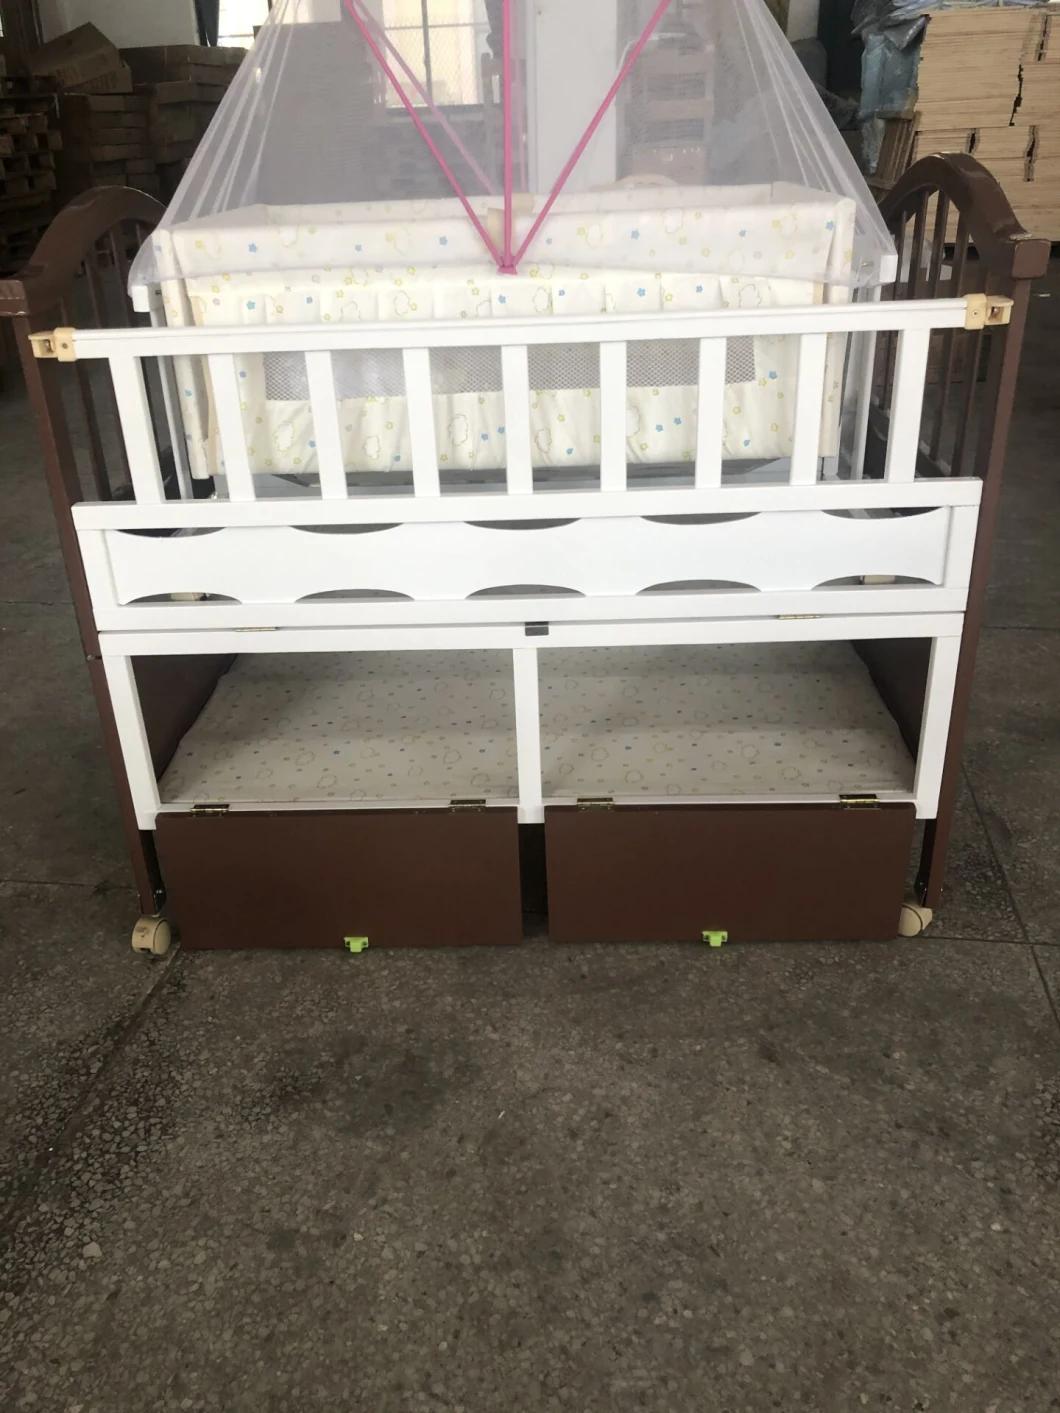 2020 Wholesale Factory Price European Quality Portable Fashion Baby Crib Baby Bed Bedside Bed